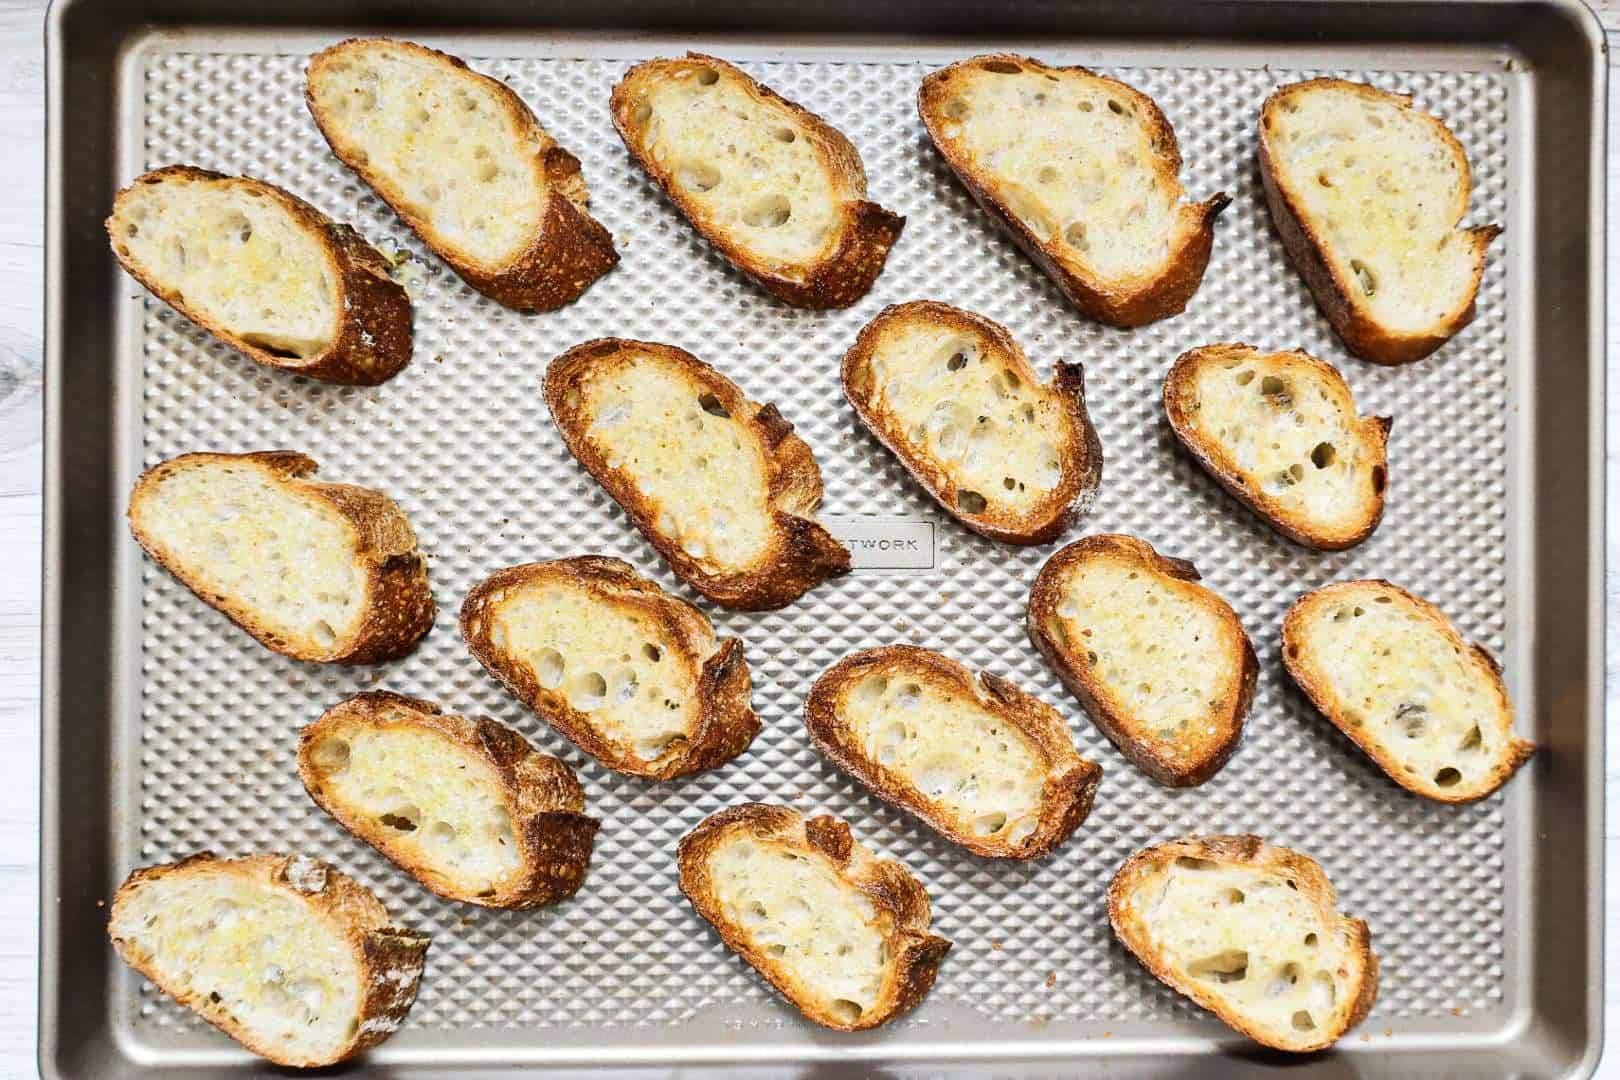 Seventeen pieces of toasted crostini on a large baking sheet.